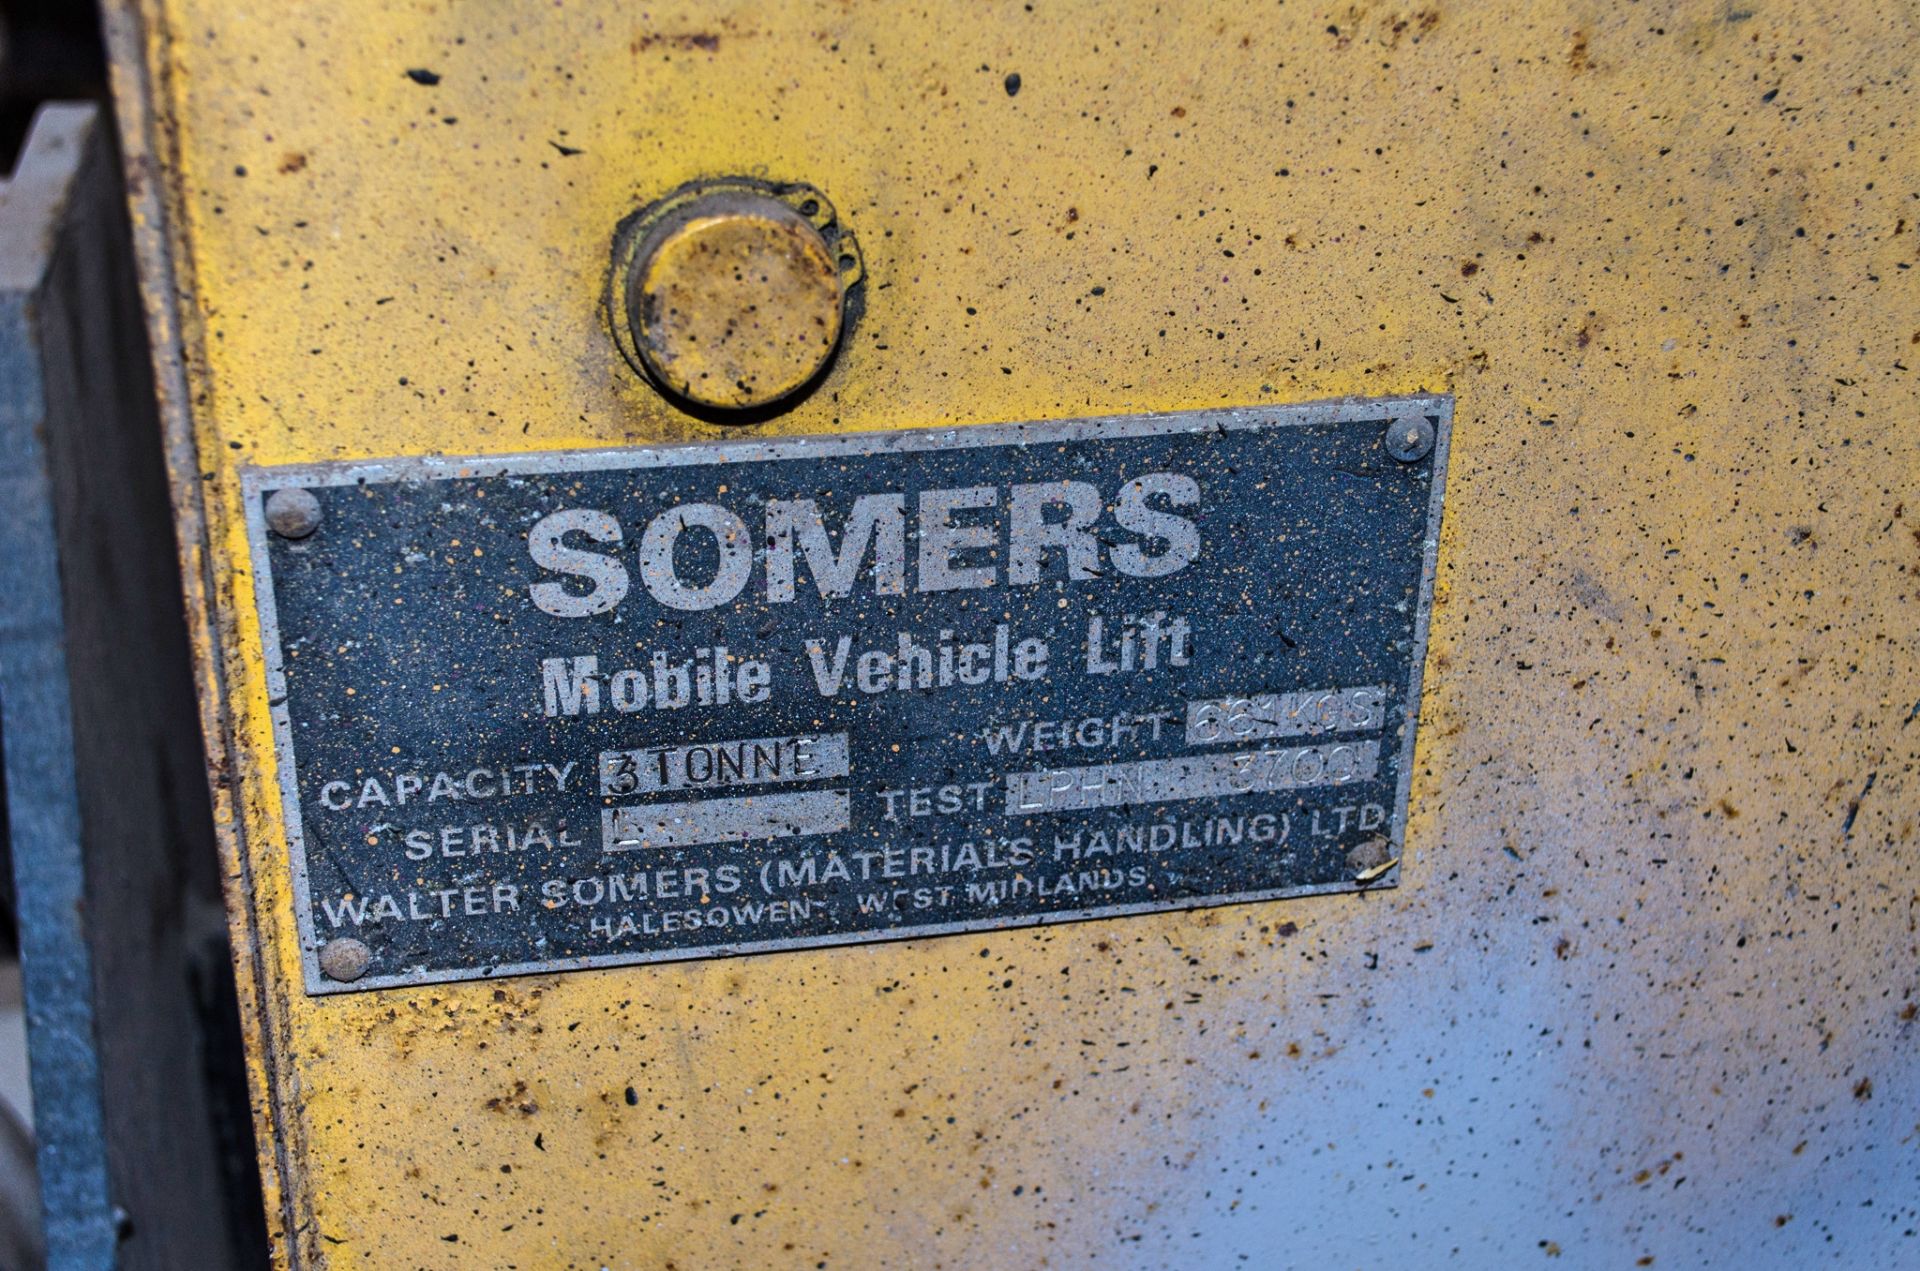 Somers 3 phase mobile column vehicle lift system Comprising of: 4 - 3 tonne lifts - Image 6 of 6